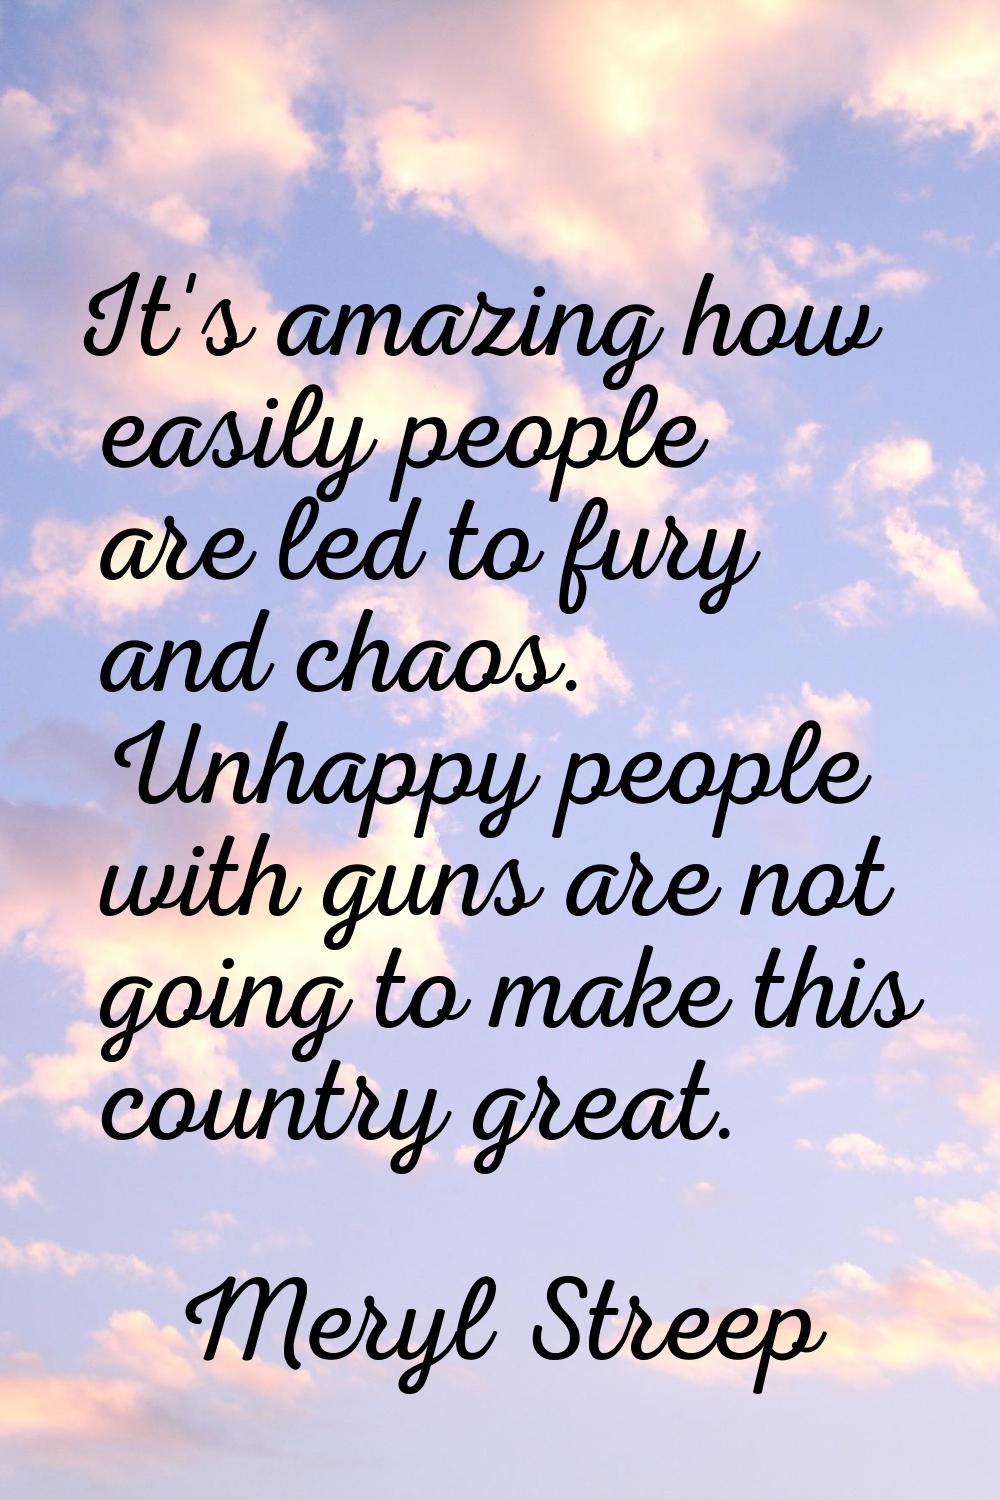 It's amazing how easily people are led to fury and chaos. Unhappy people with guns are not going to